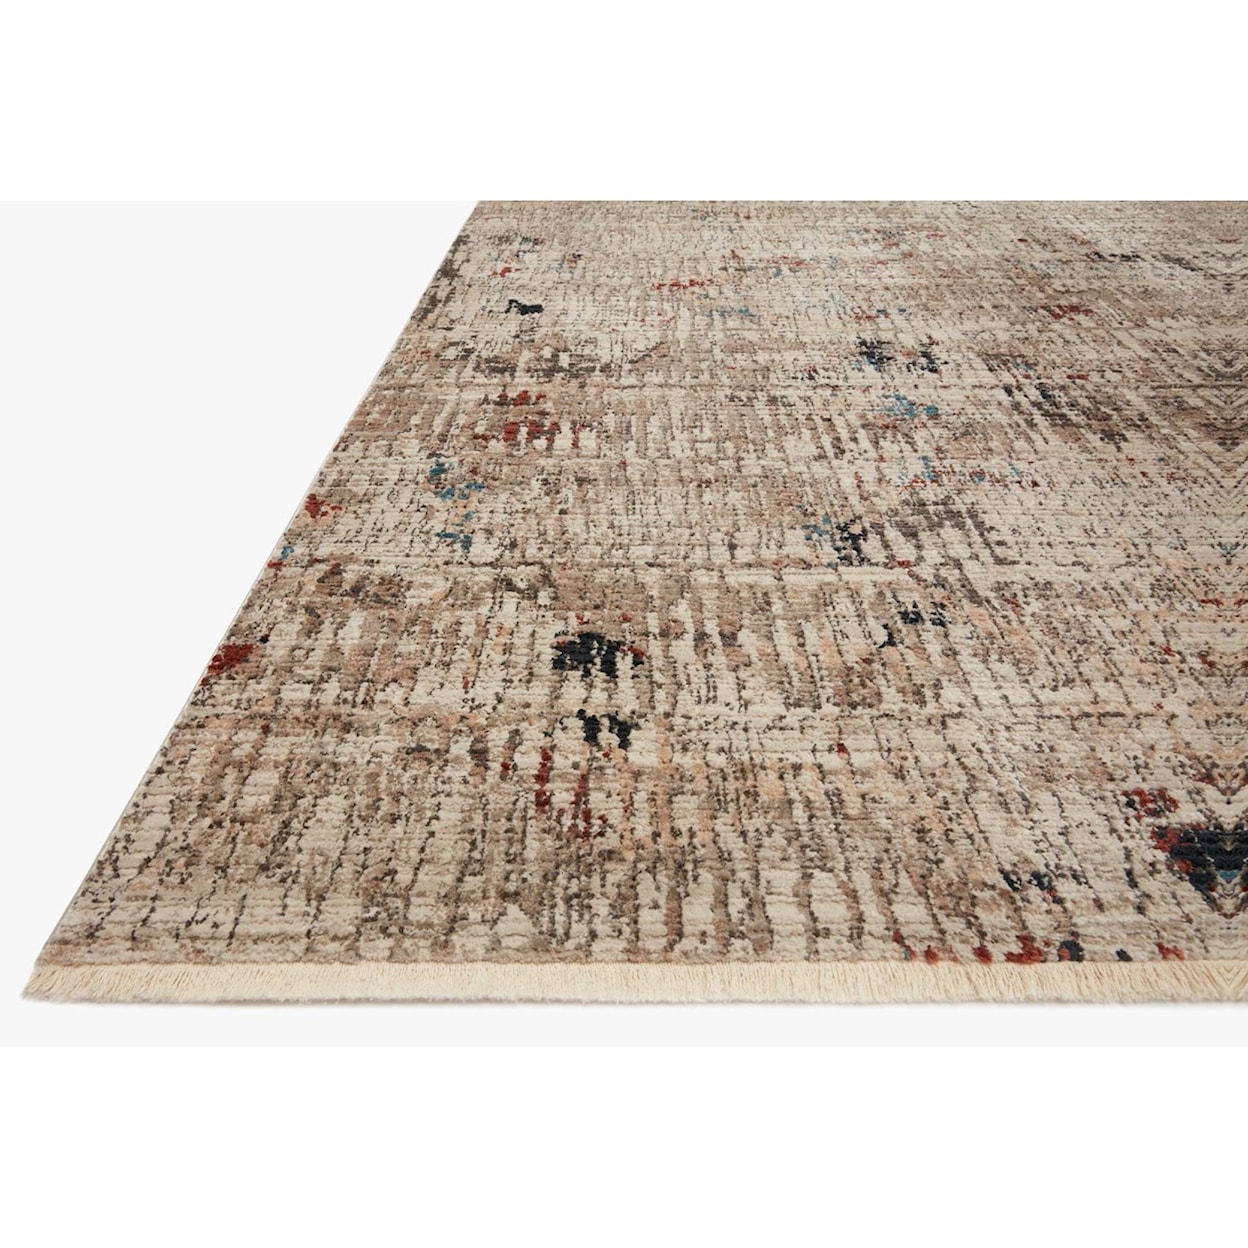 Reeds Rugs Leigh 18" x 18"  Ivory / Multi Rug